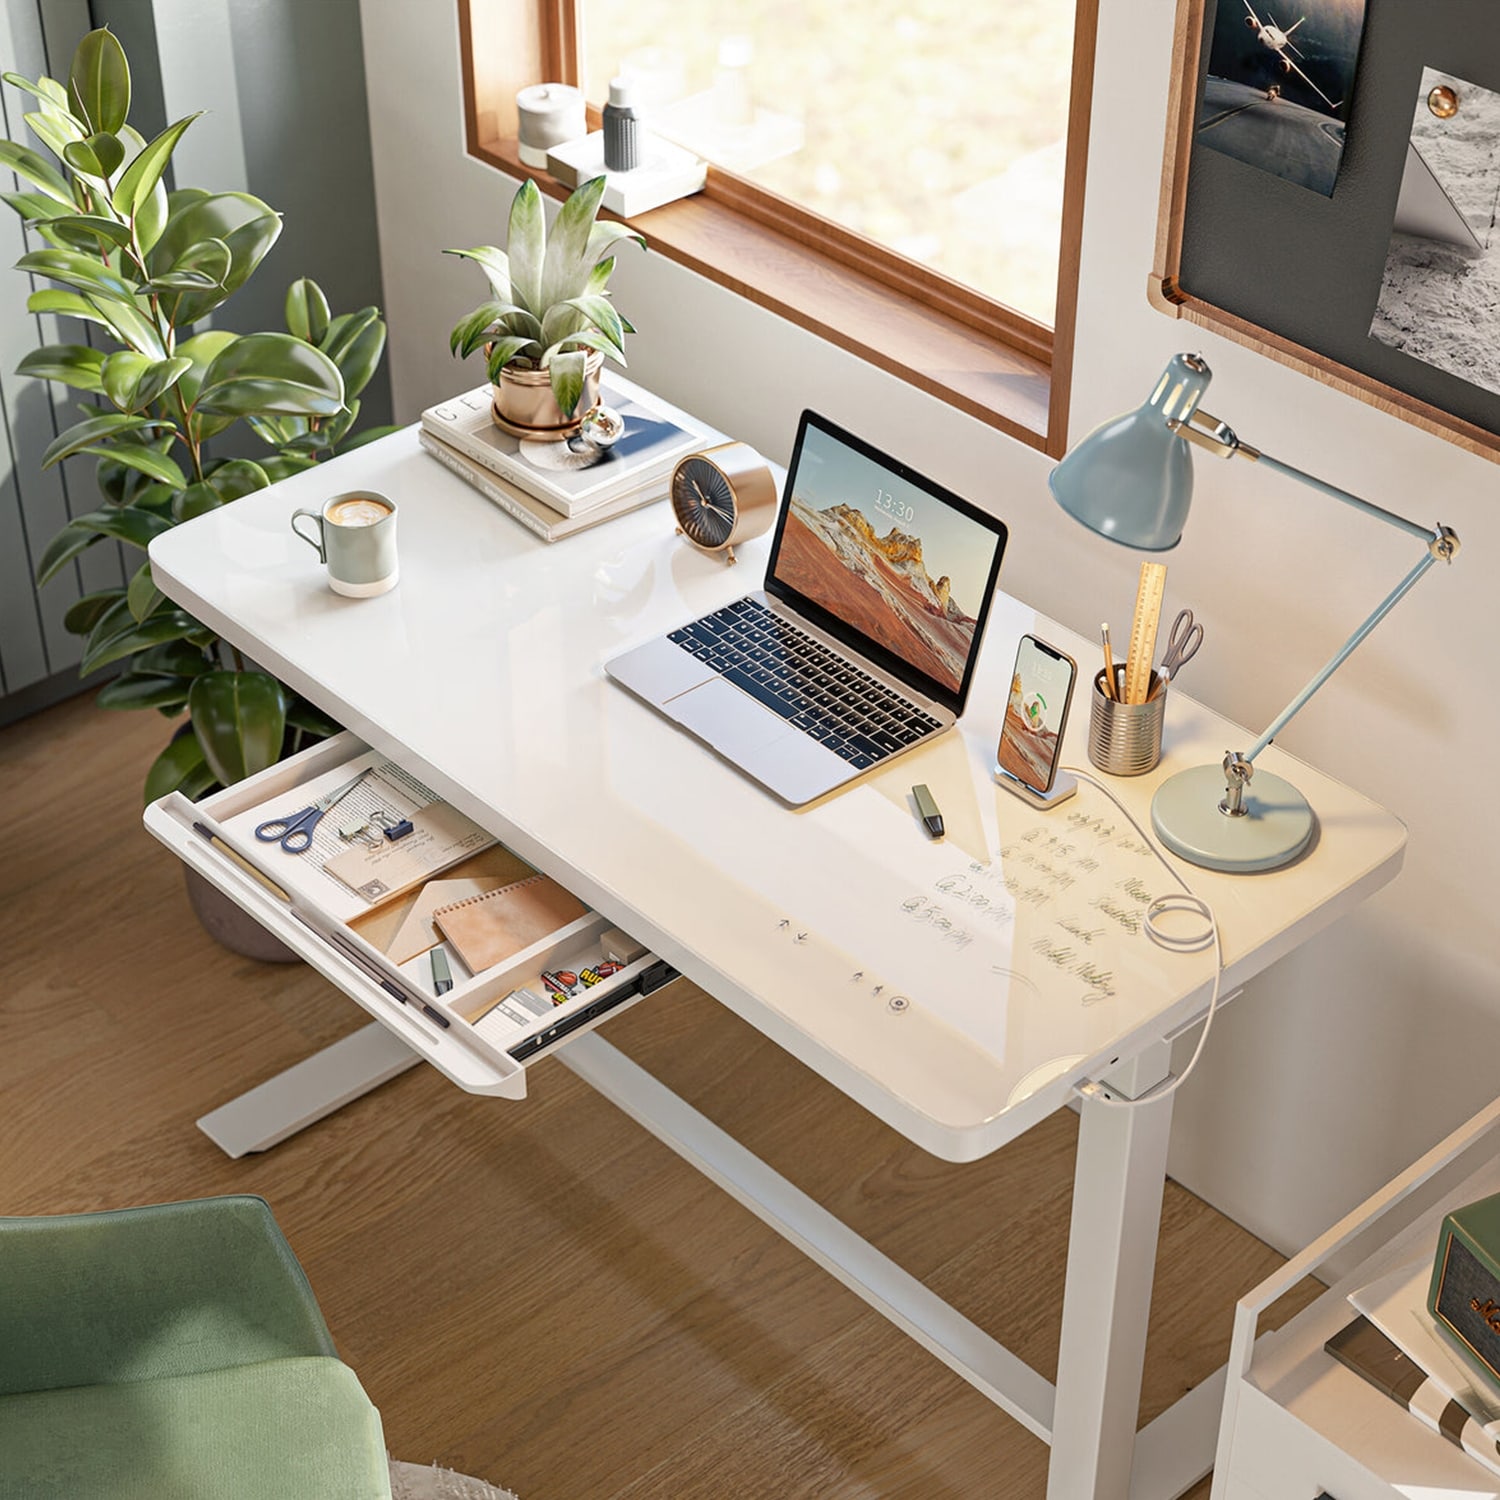 https://ak1.ostkcdn.com/images/products/is/images/direct/e1400fbaeabb94181abe5da39c622adc2c40d910/Small-Computer-Desk-Study-Table-for-Small-Spaces-Home-Office-Student-Laptop-PC-Writing-Desks-Office-Desk-with-Keyboard-Tray.jpg